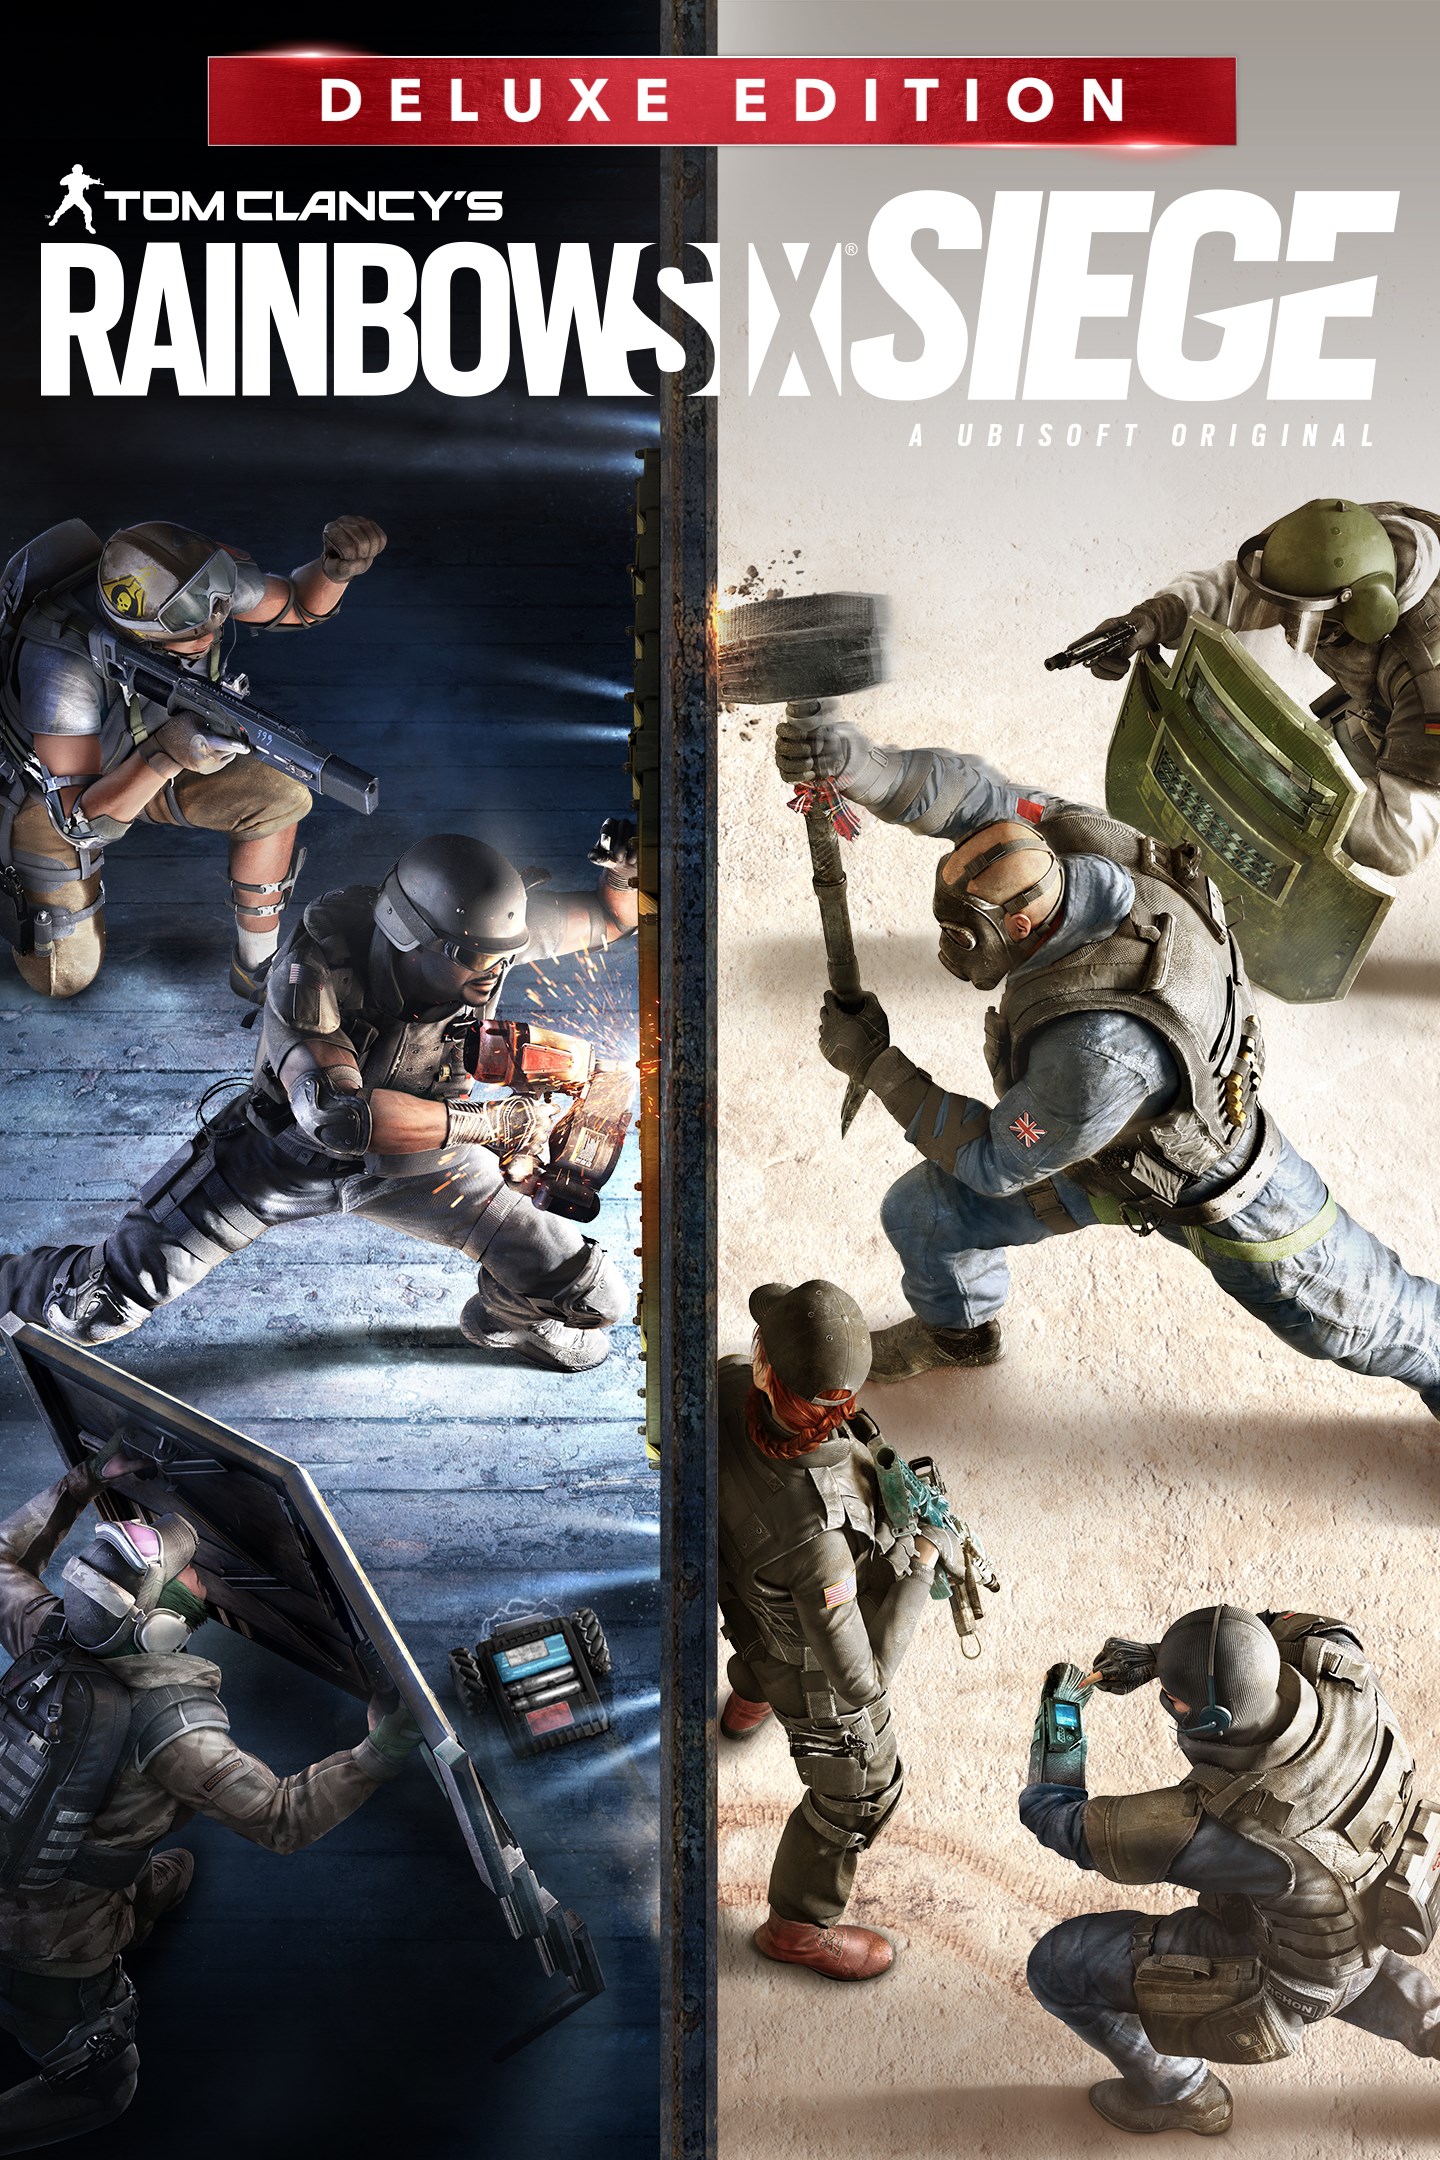 (Beta) | Play Siege Rainbow Gaming Clancy\'s on Deluxe Cloud Edition Xbox Six® Tom